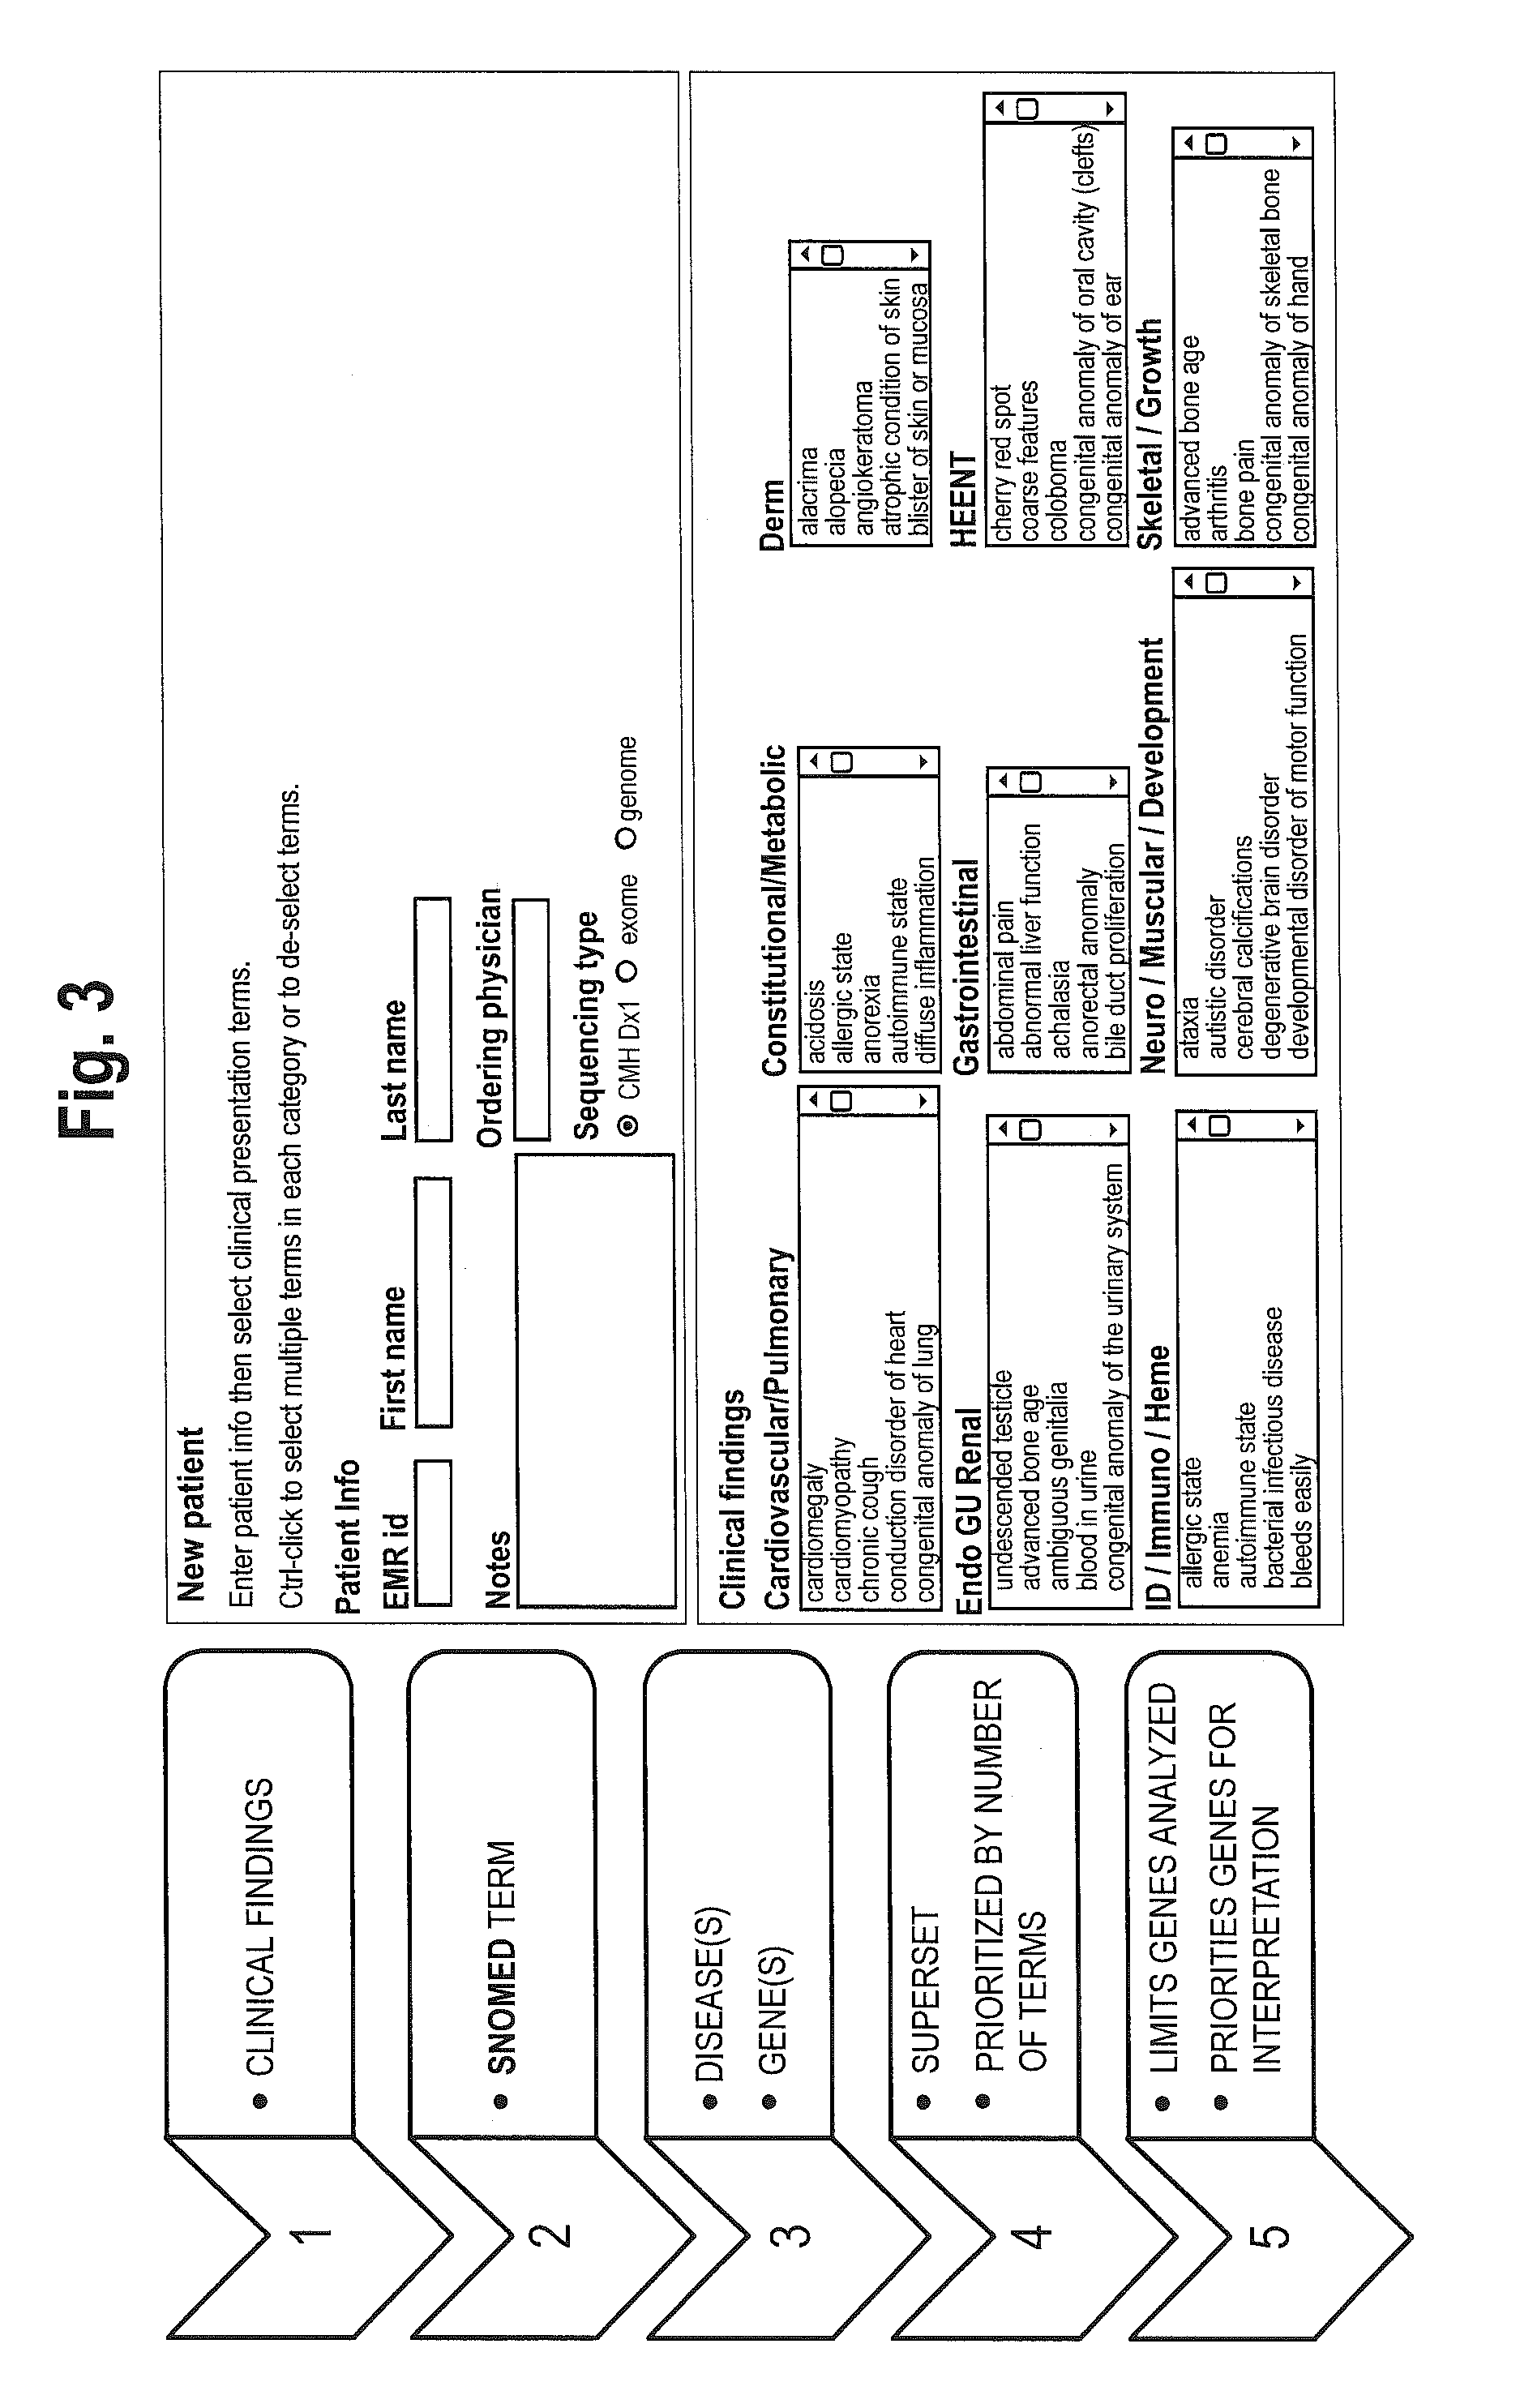 System for genome analysis and genetic disease diagnosis